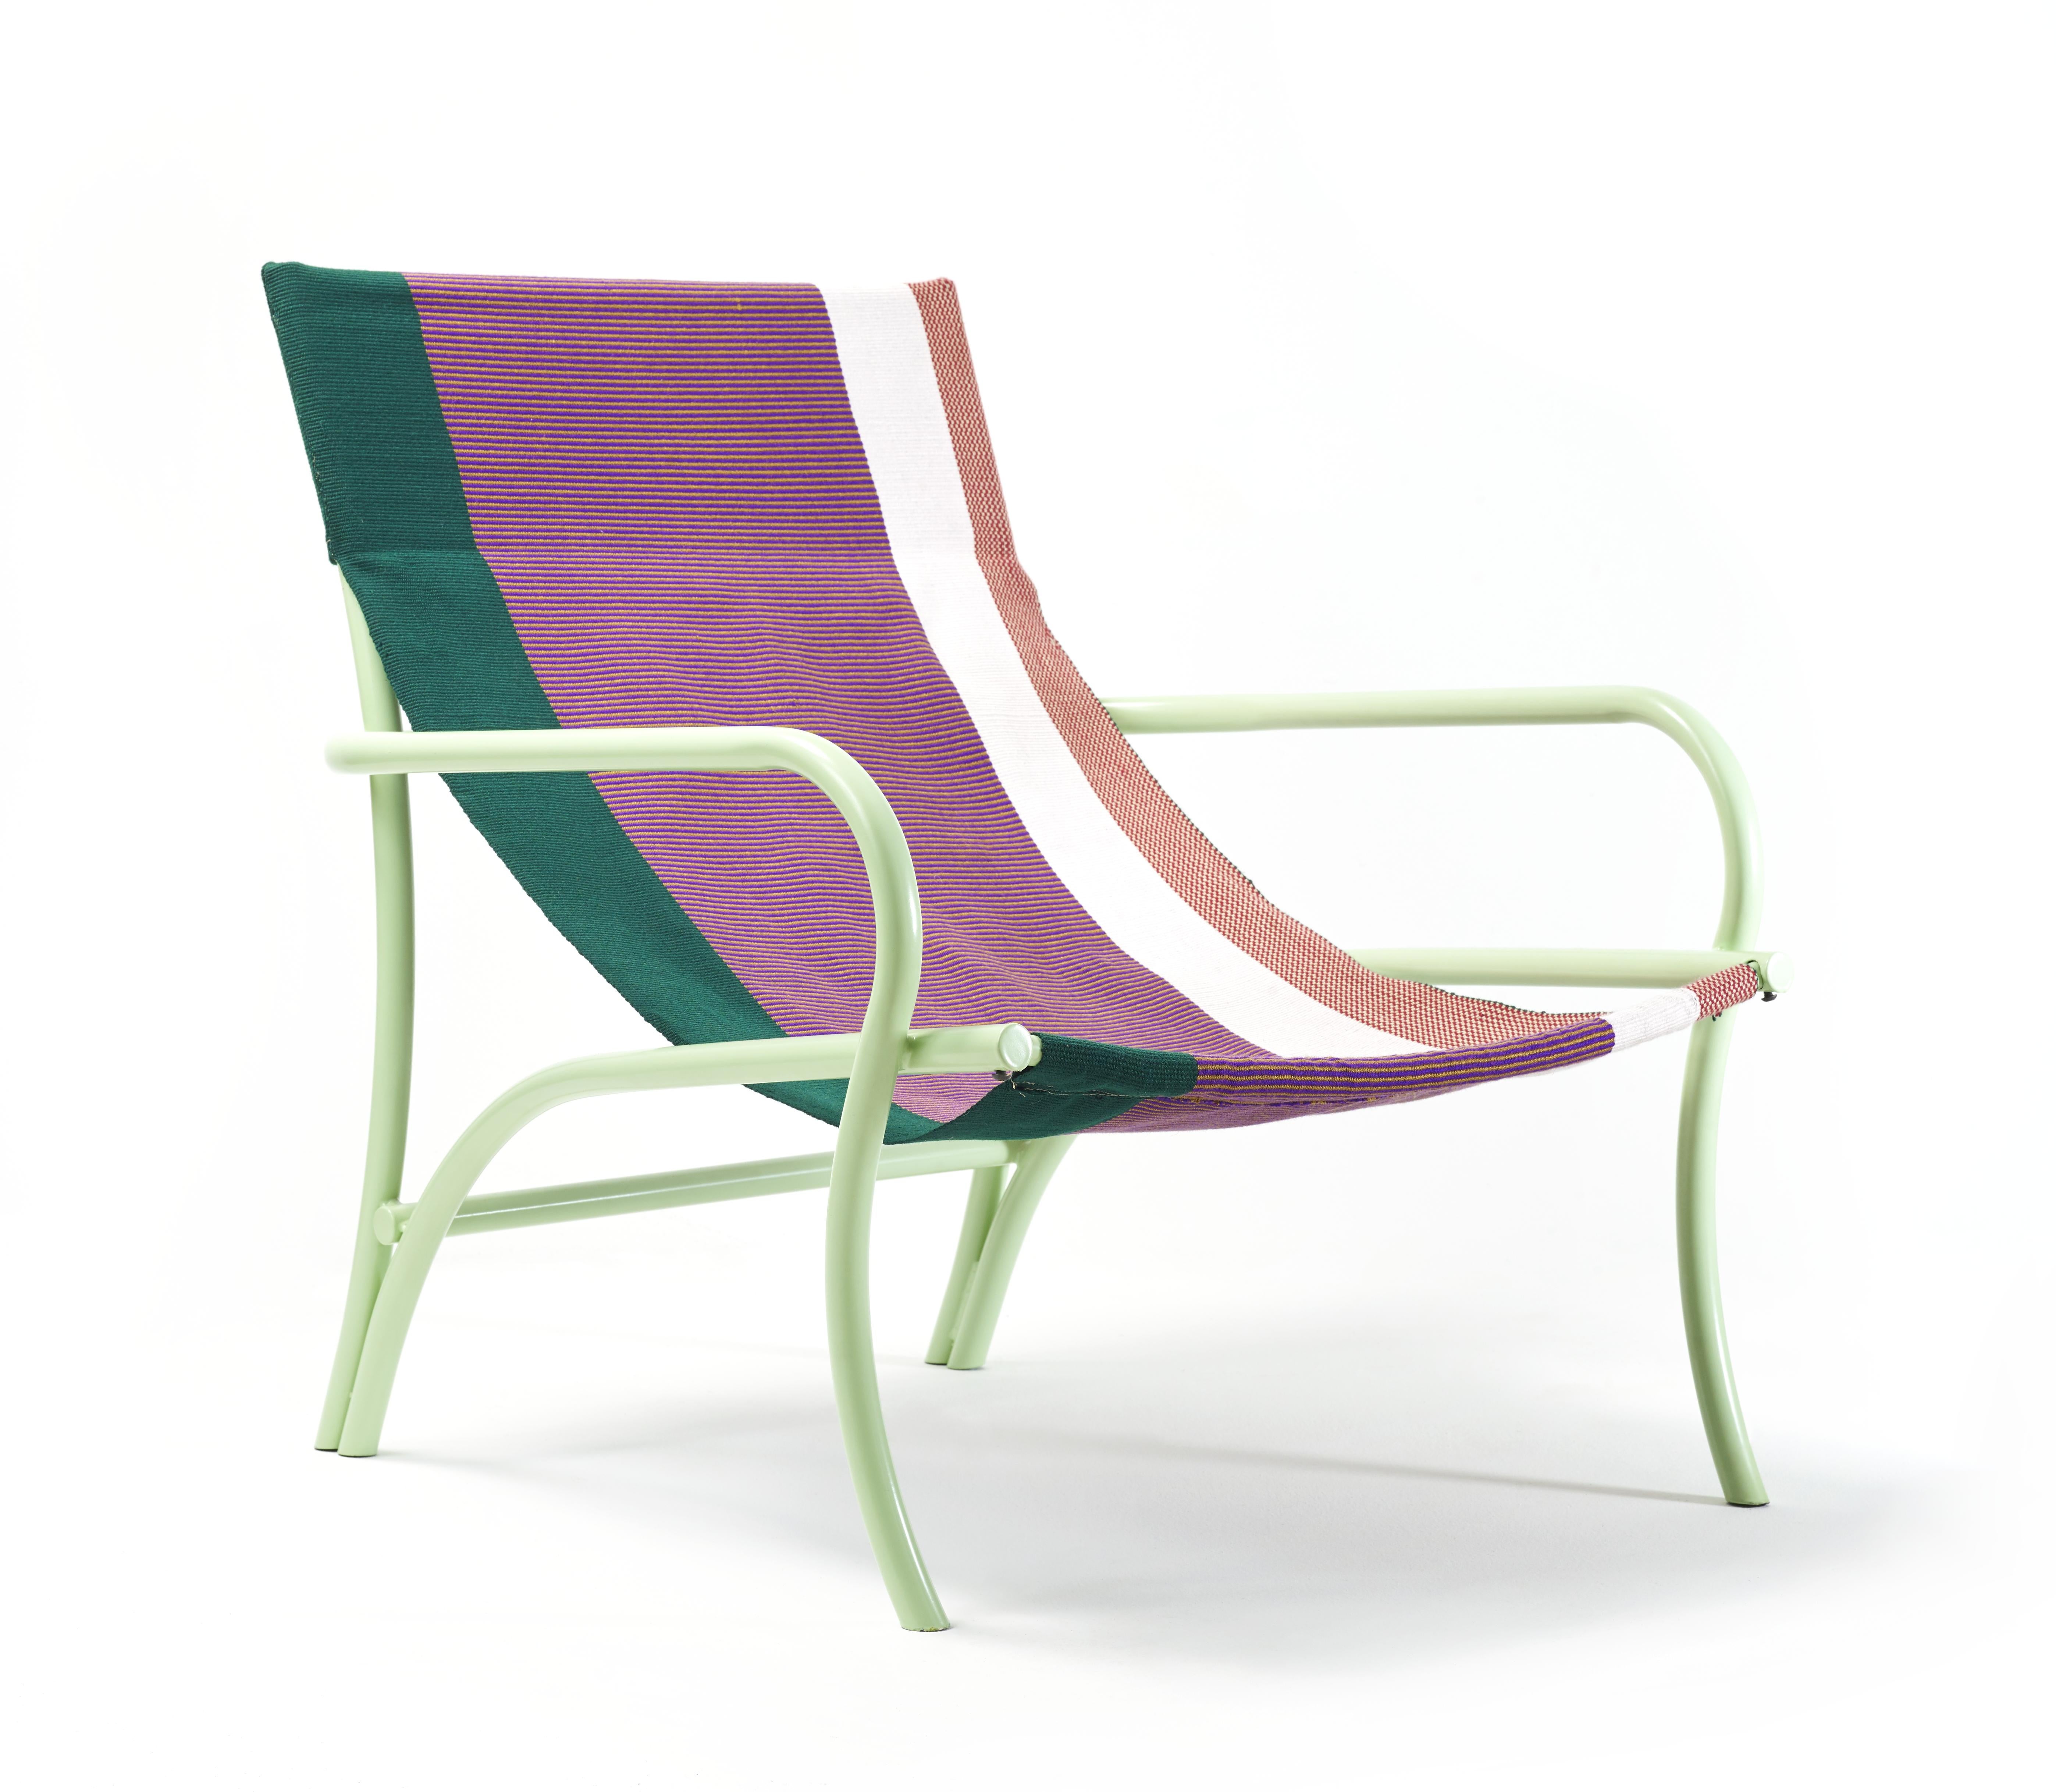 Verde Maraca lounge chair by Sebastian Herkner
Materials: galvanized and powder-coated tubular steel. 100% cotton. 
Technique: hand-woven with 100% cotton yarns.
Dimensions: W 72.7 x D 86.7 x H 88.5 cm 
Available in colors: verde/ purpura/ rojo,